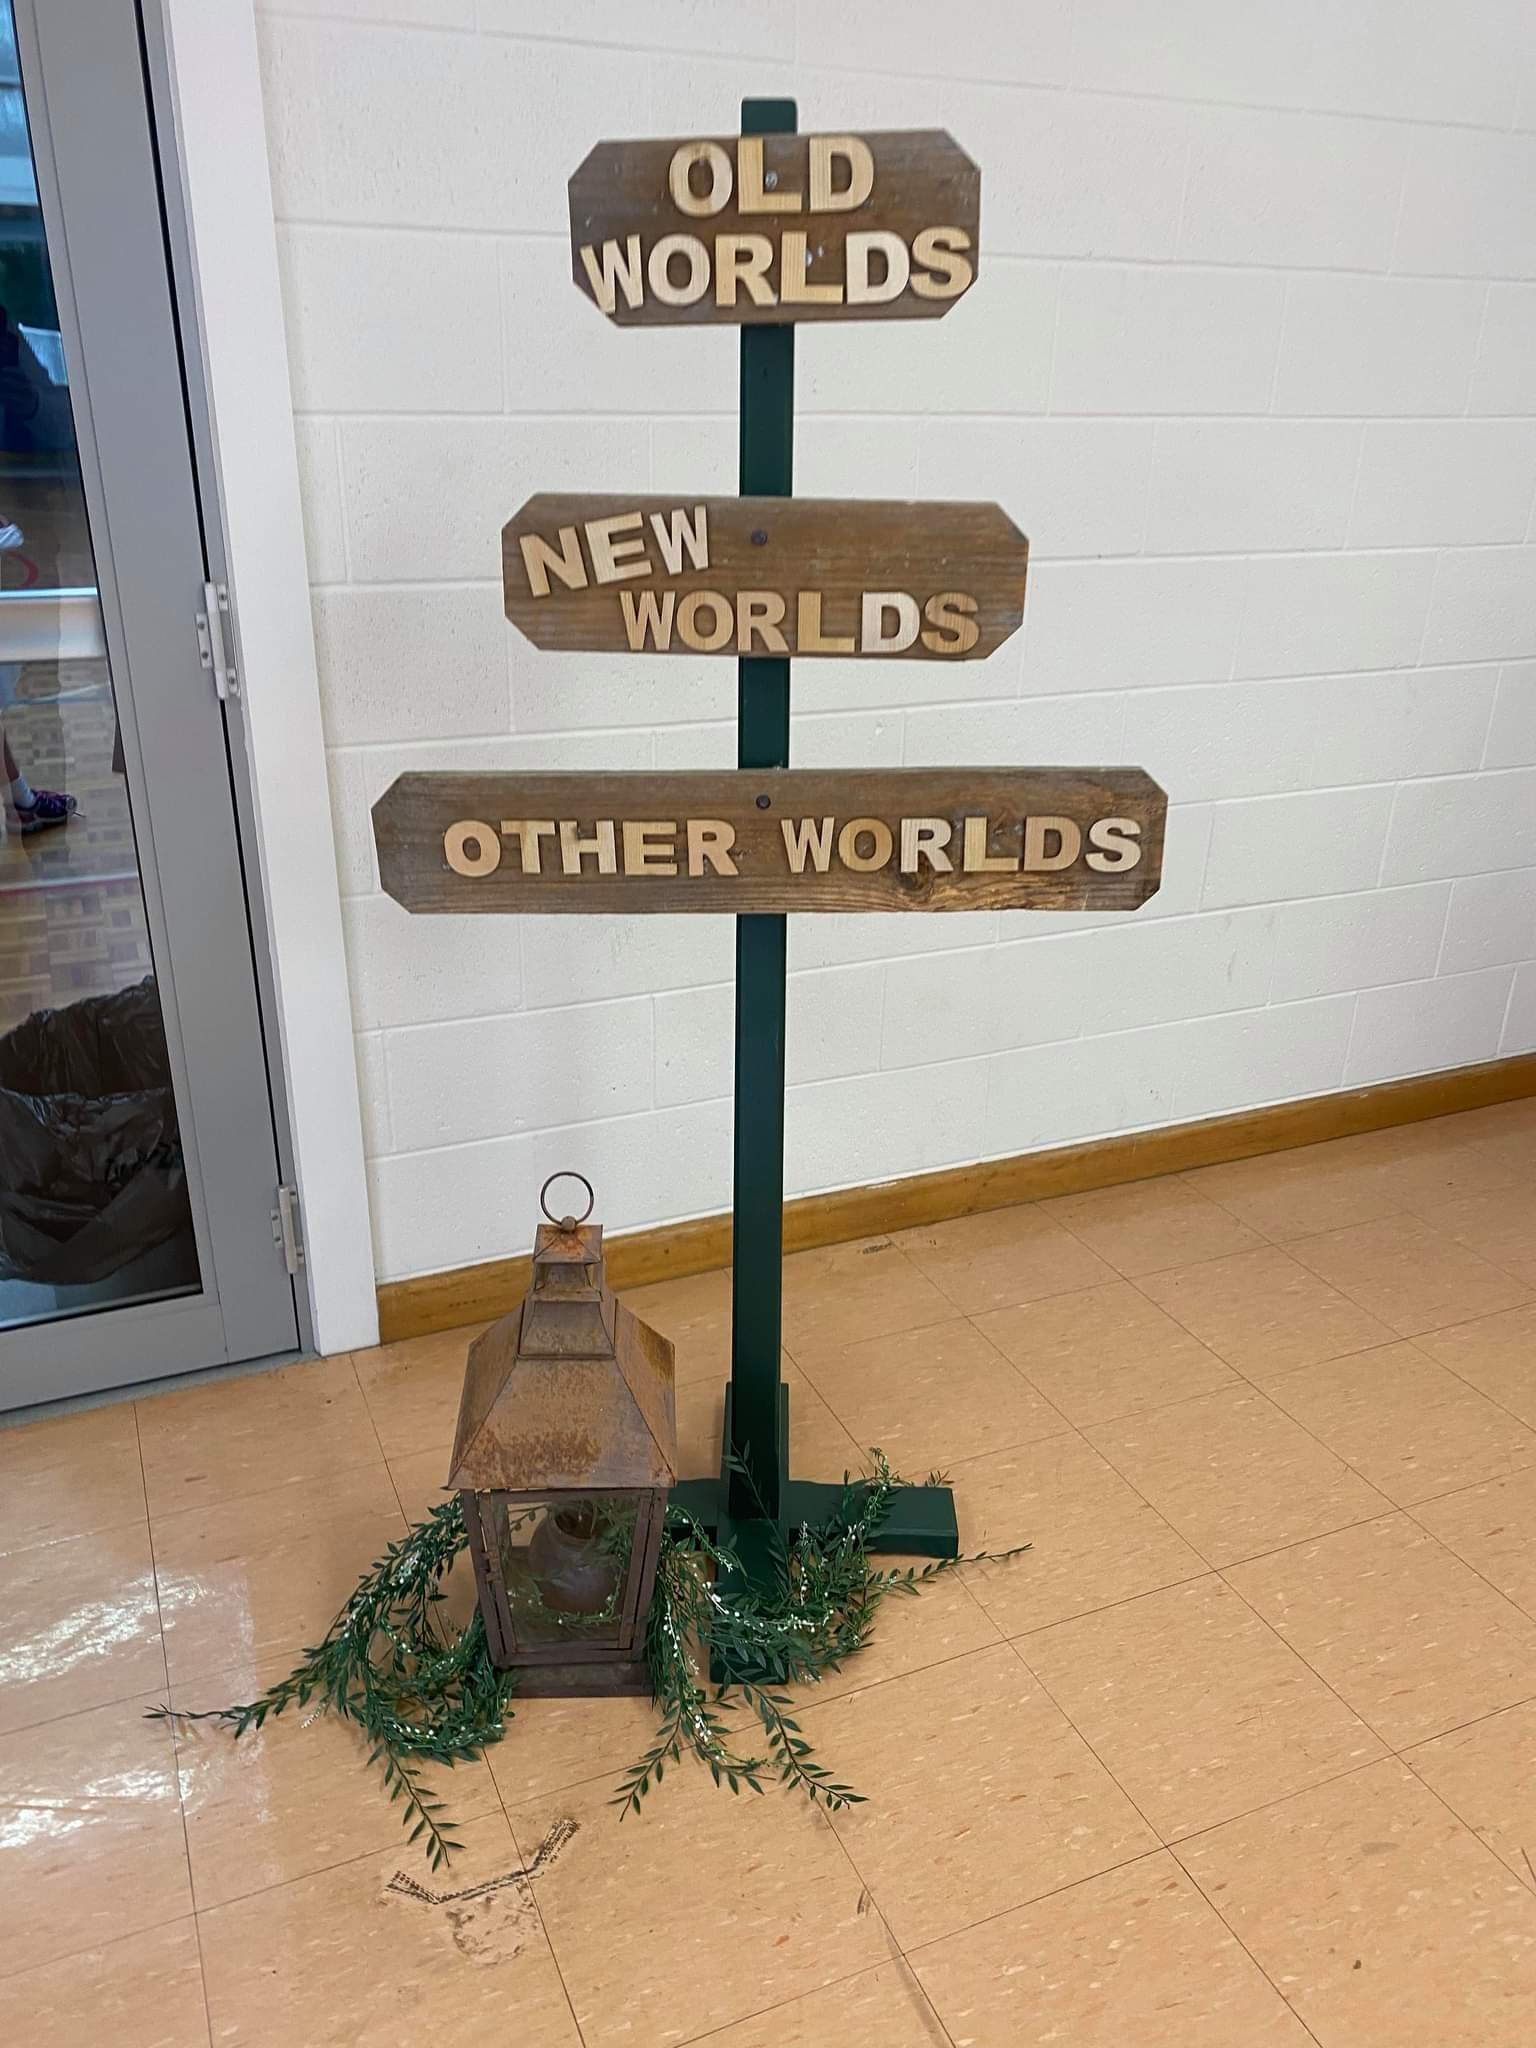 Old Worlds New Worlds Other Worlds sign